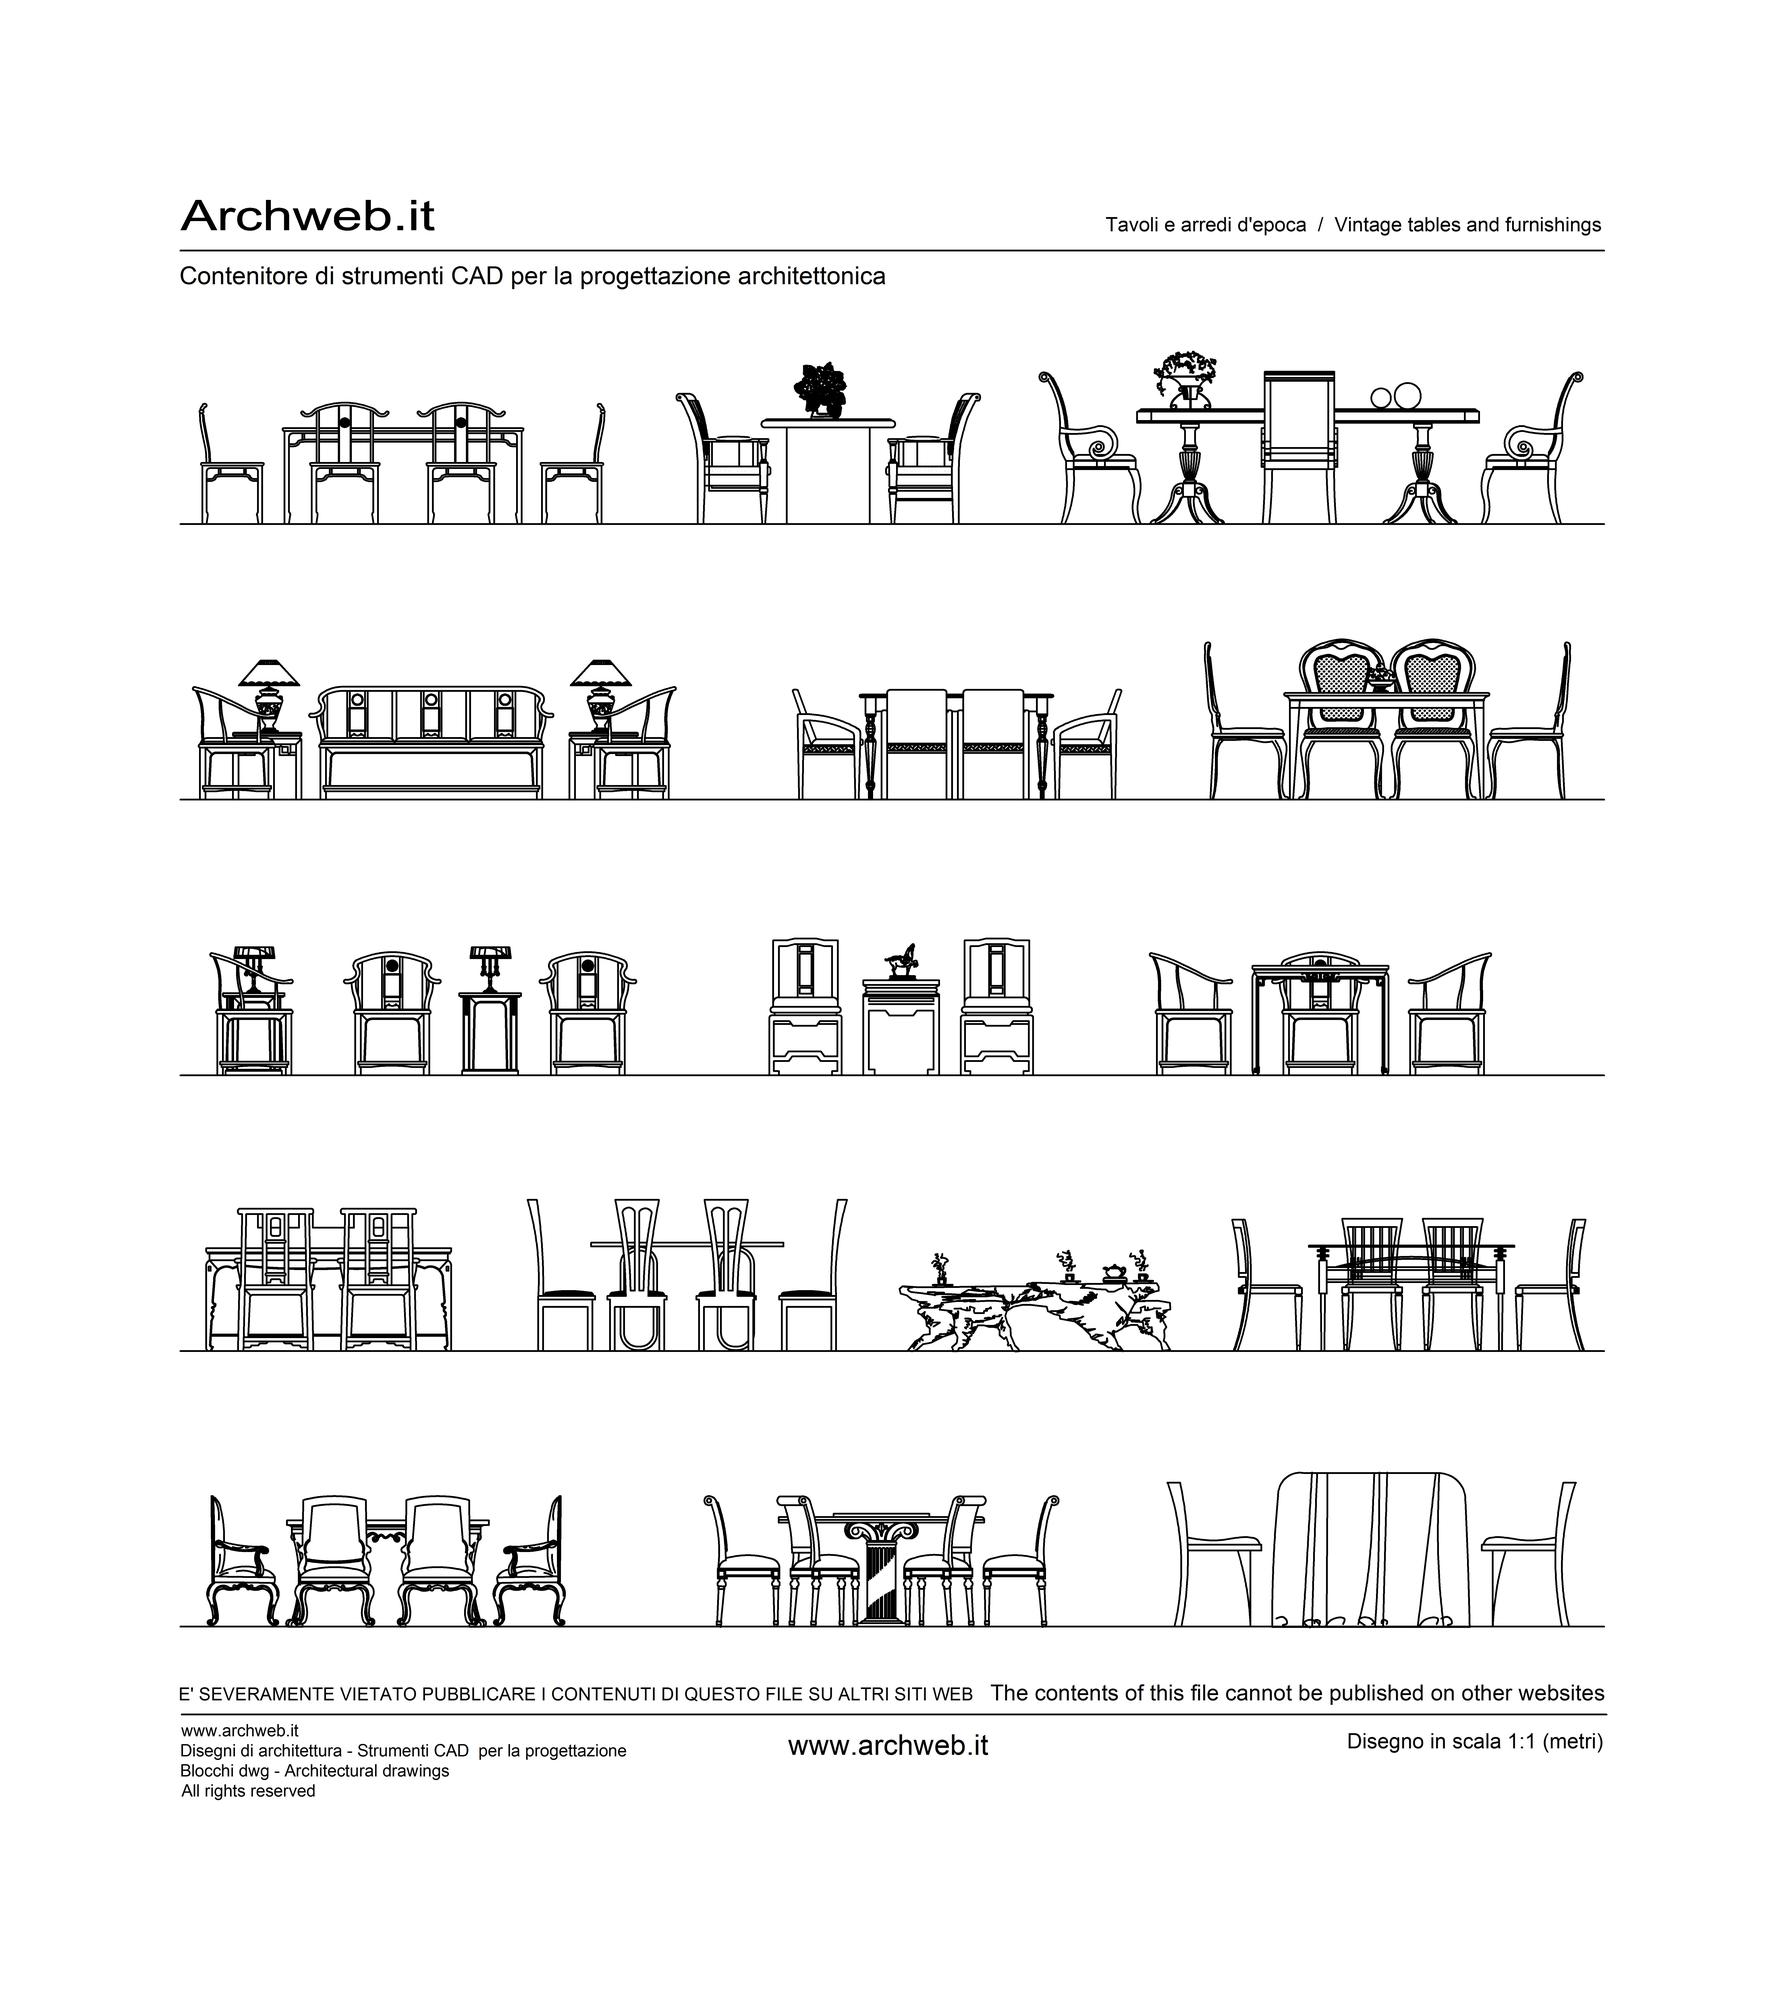 Drawings prospectus of period furniture tables